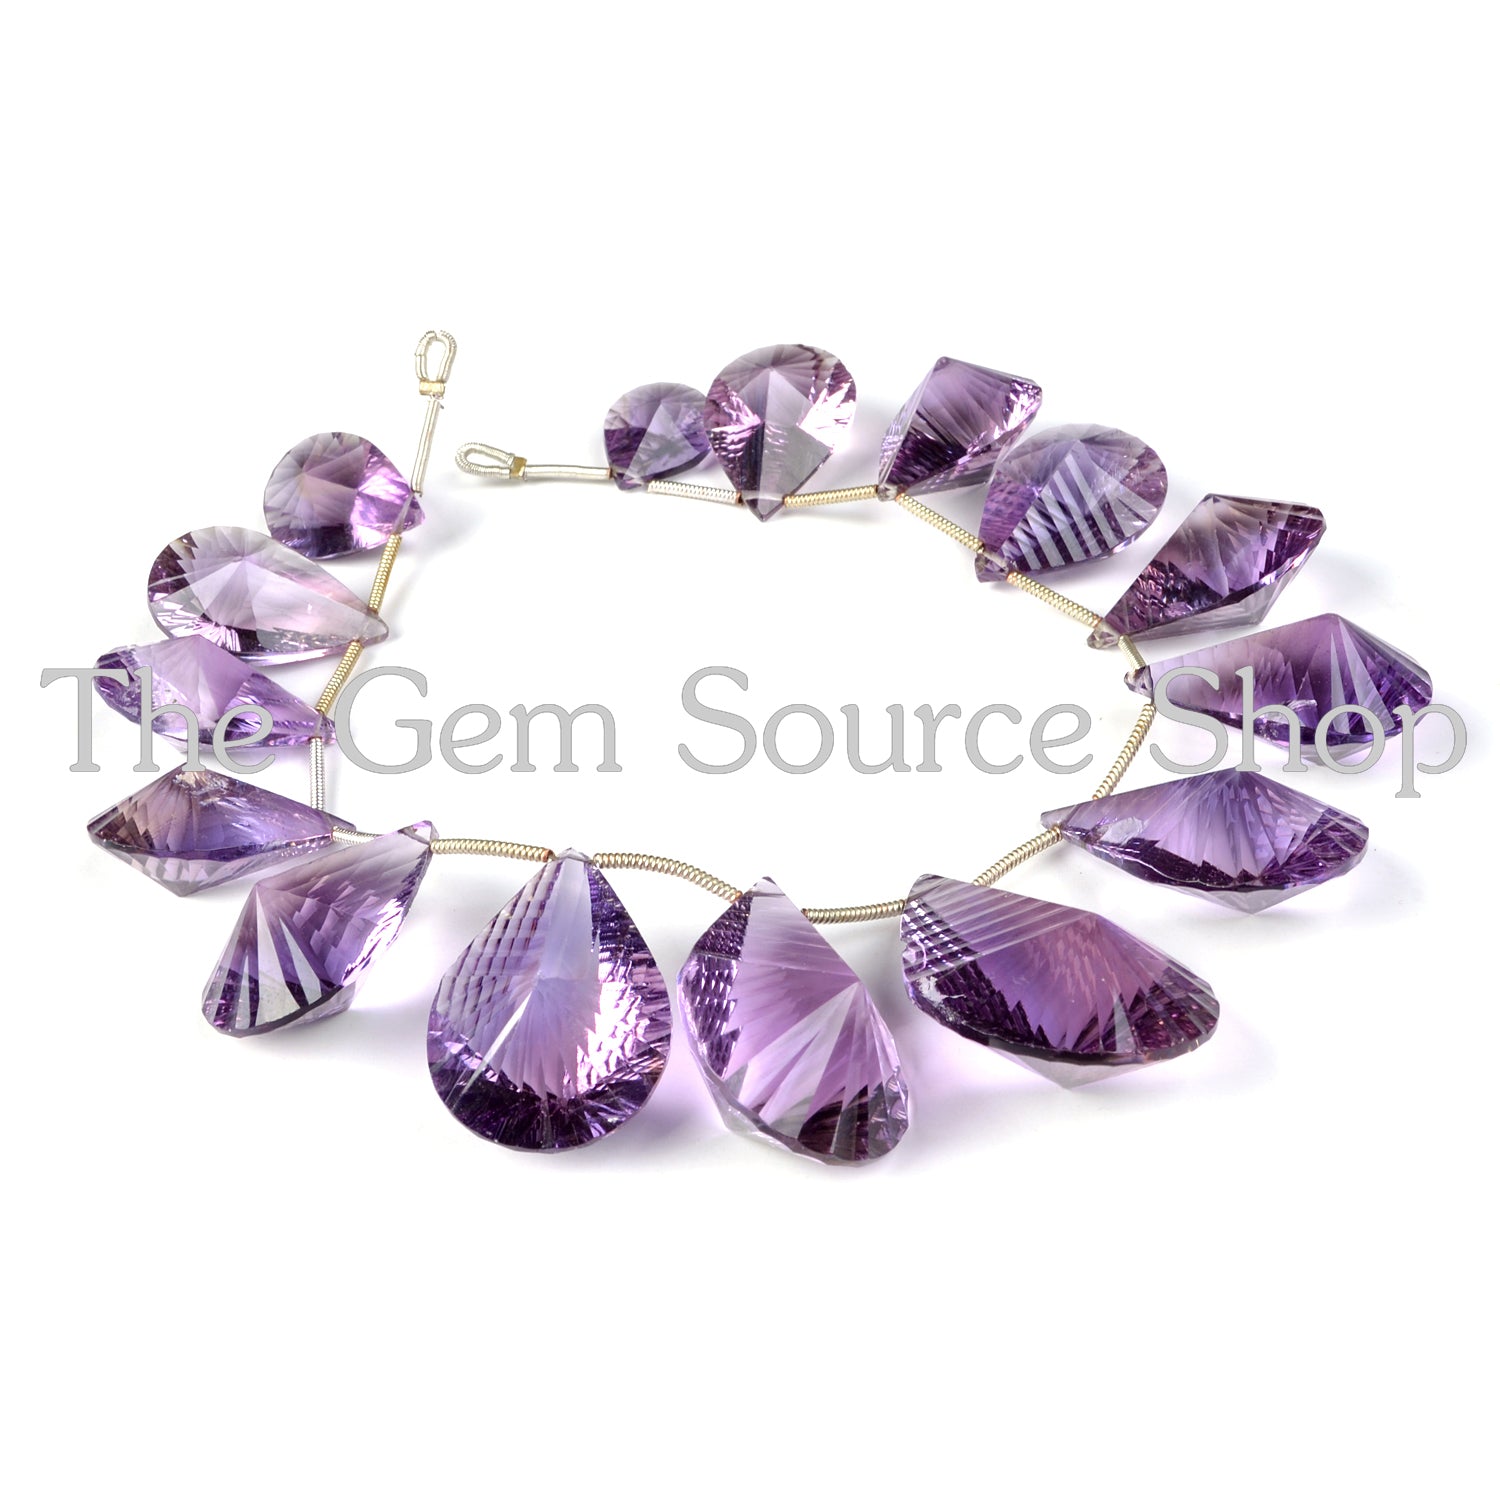 Beads For Jewelry